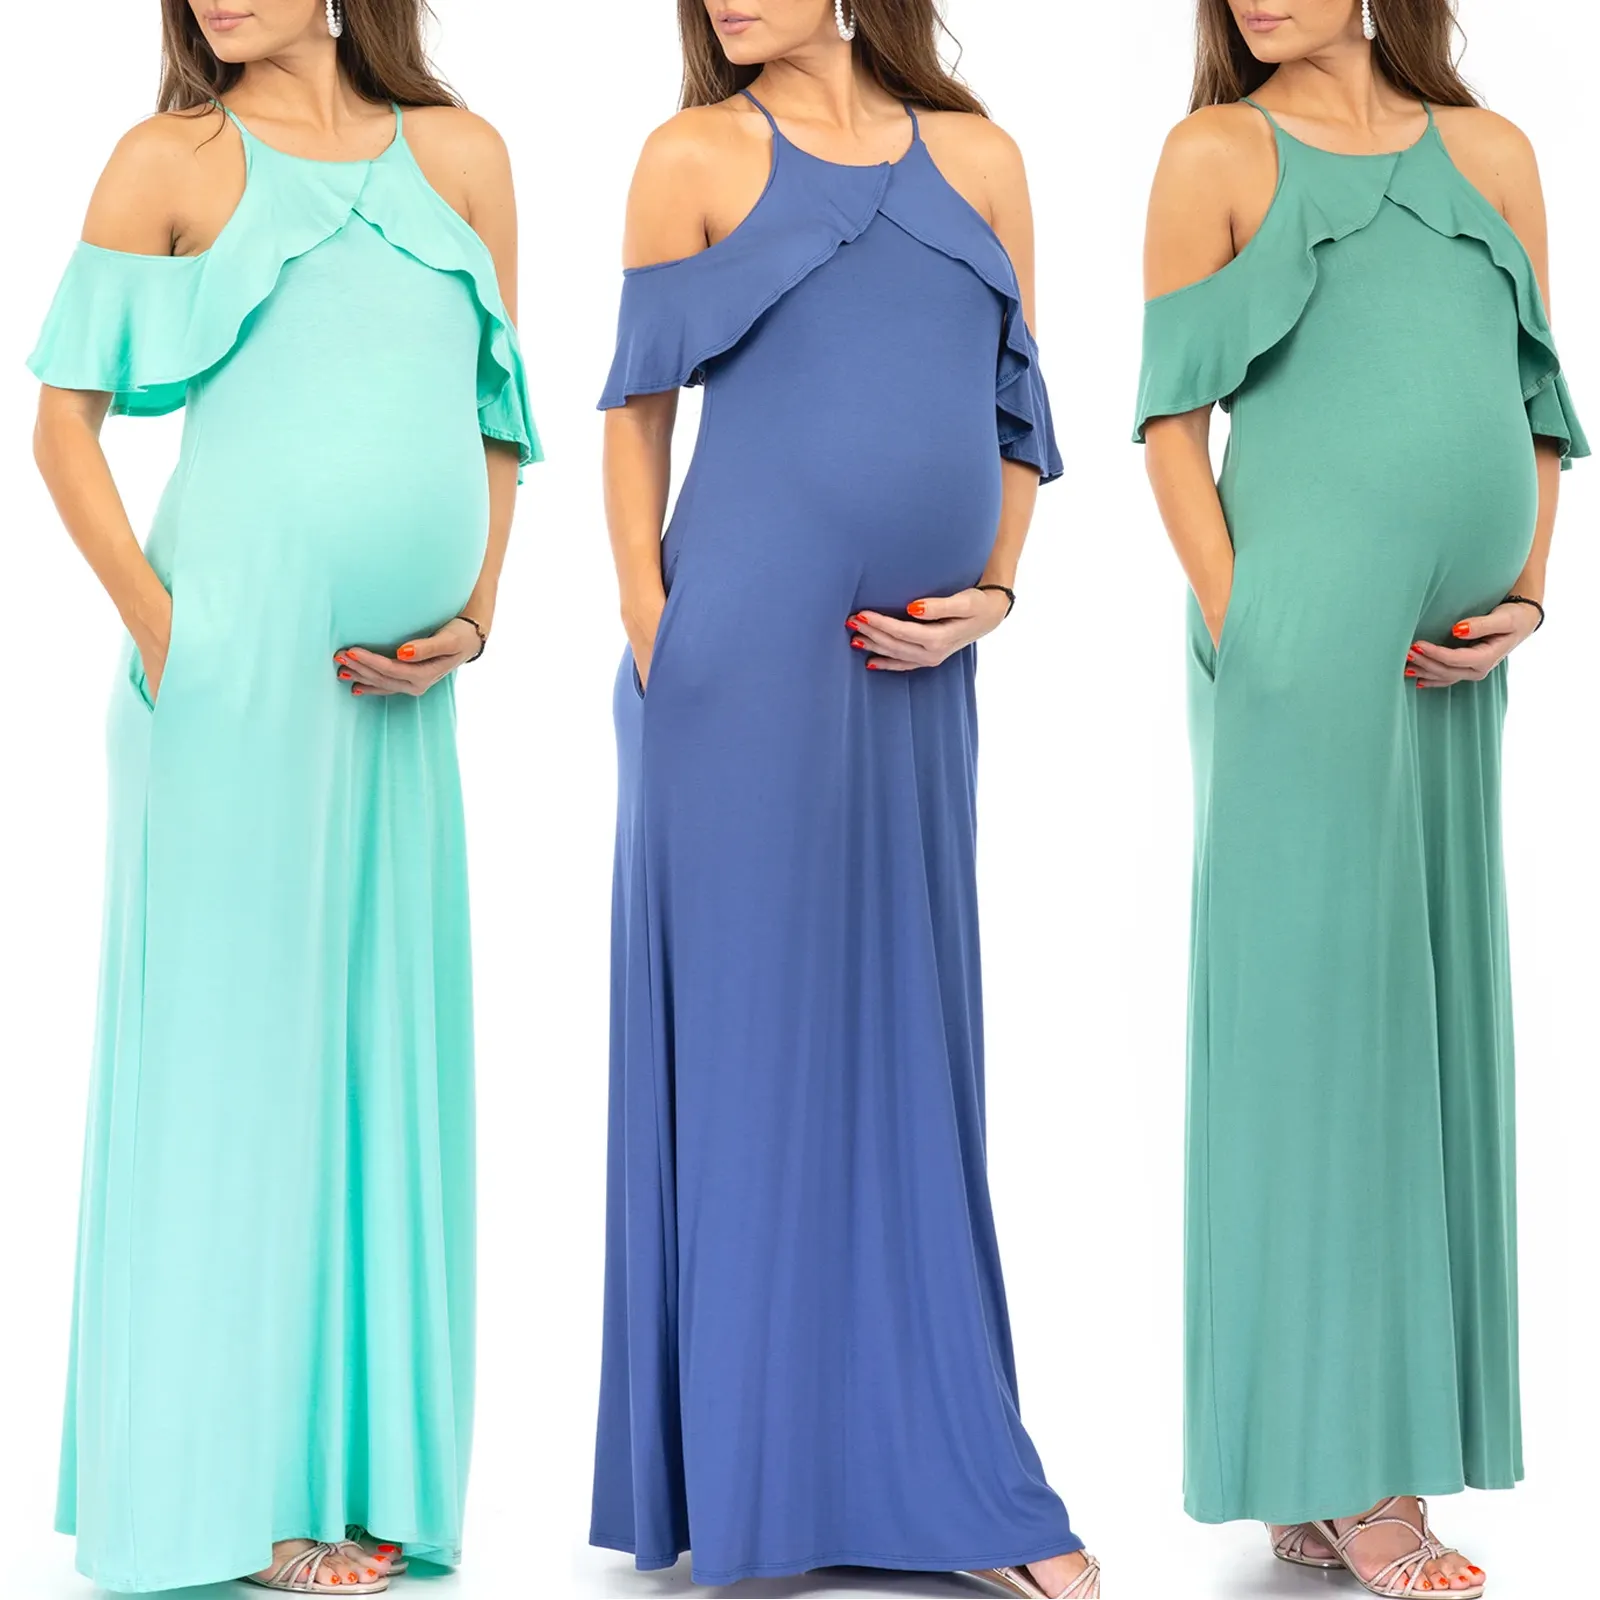 OEM Hot Sale Lowest Price Solid Color Casual Strap Ruffle Maternity Photo Shoot Maxi Dresses